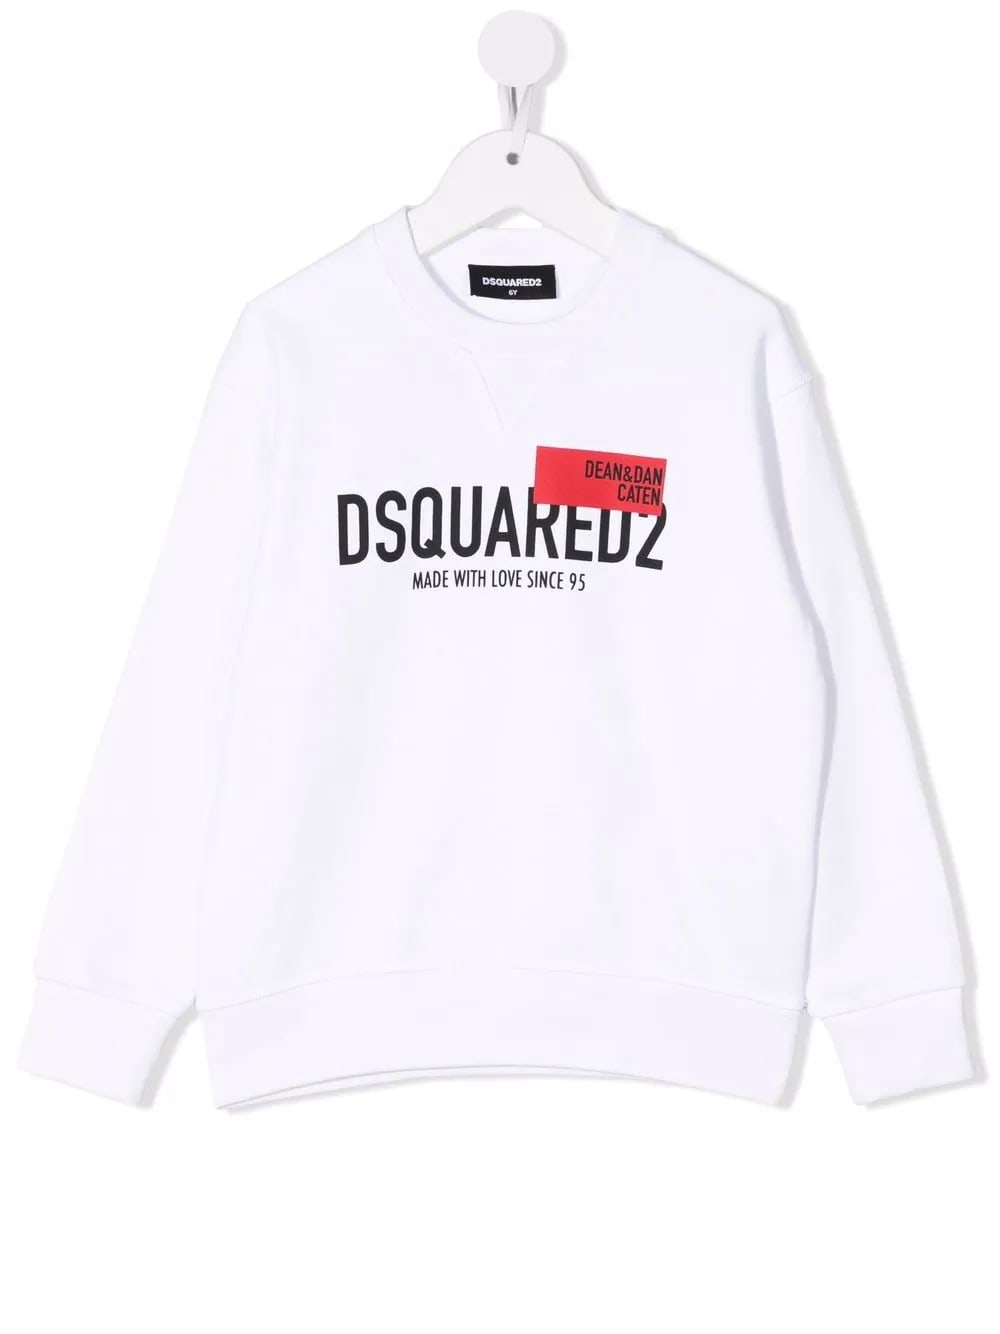 Kids White Sweatshirt With Dsquared2 made With Love Print